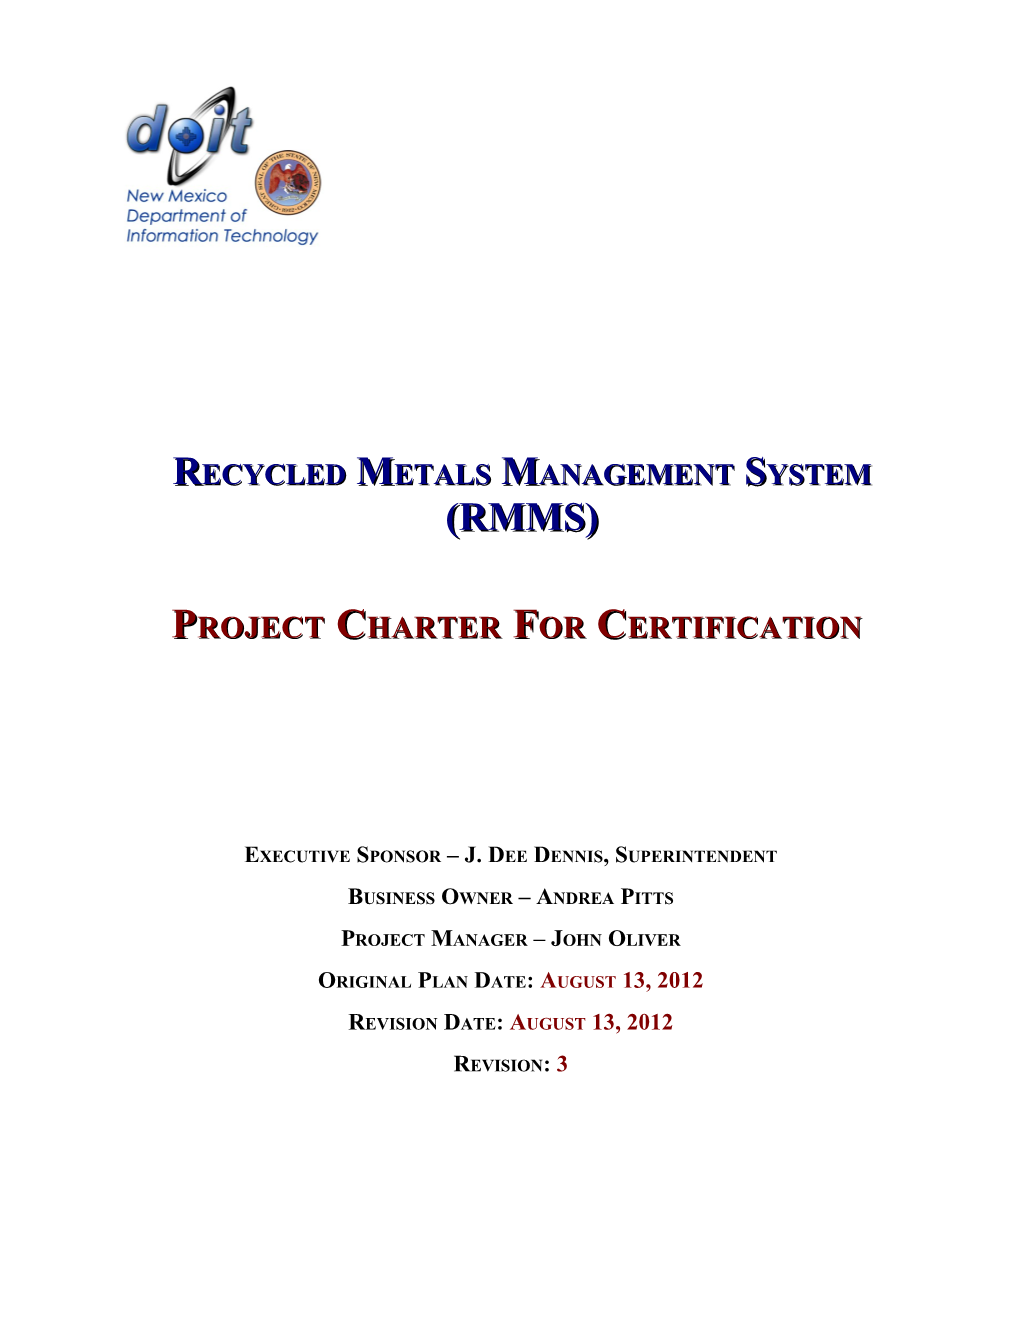 Recycled Metals Management System (RMMS)